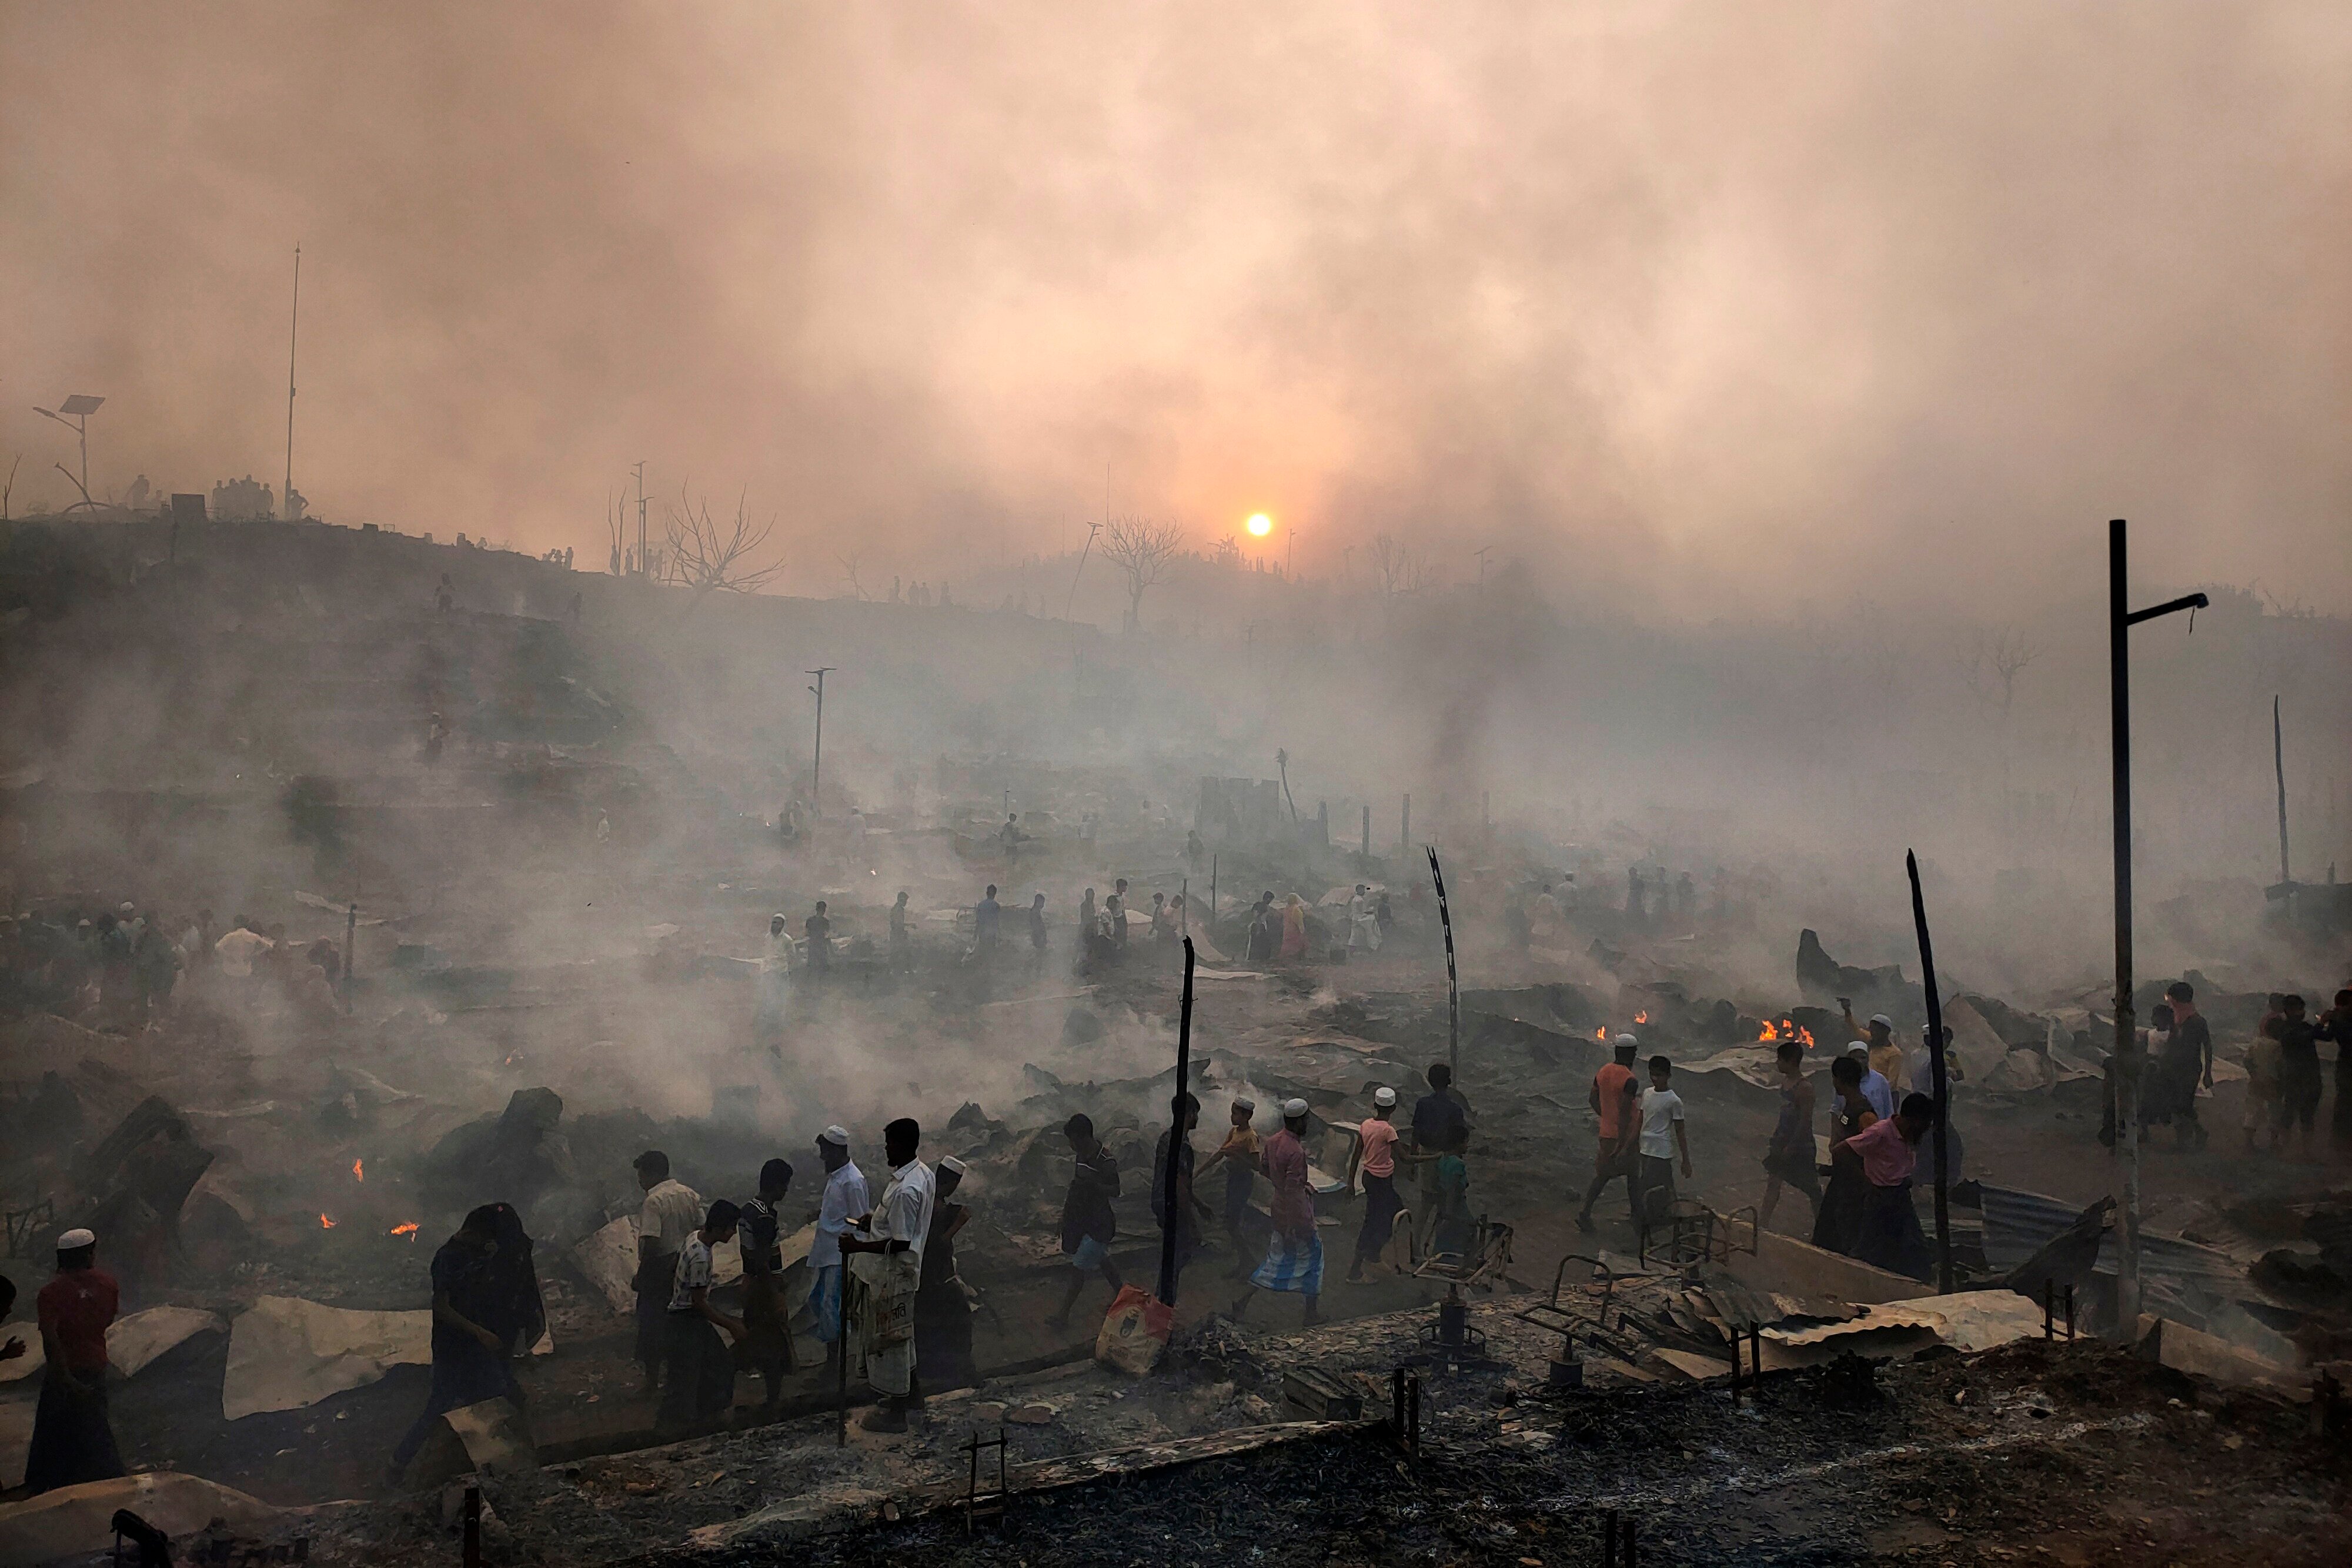 Rohingya refugees try to salvage their belongings after a major fire in a camp in Cox’s Bazar in March. Photo: AP